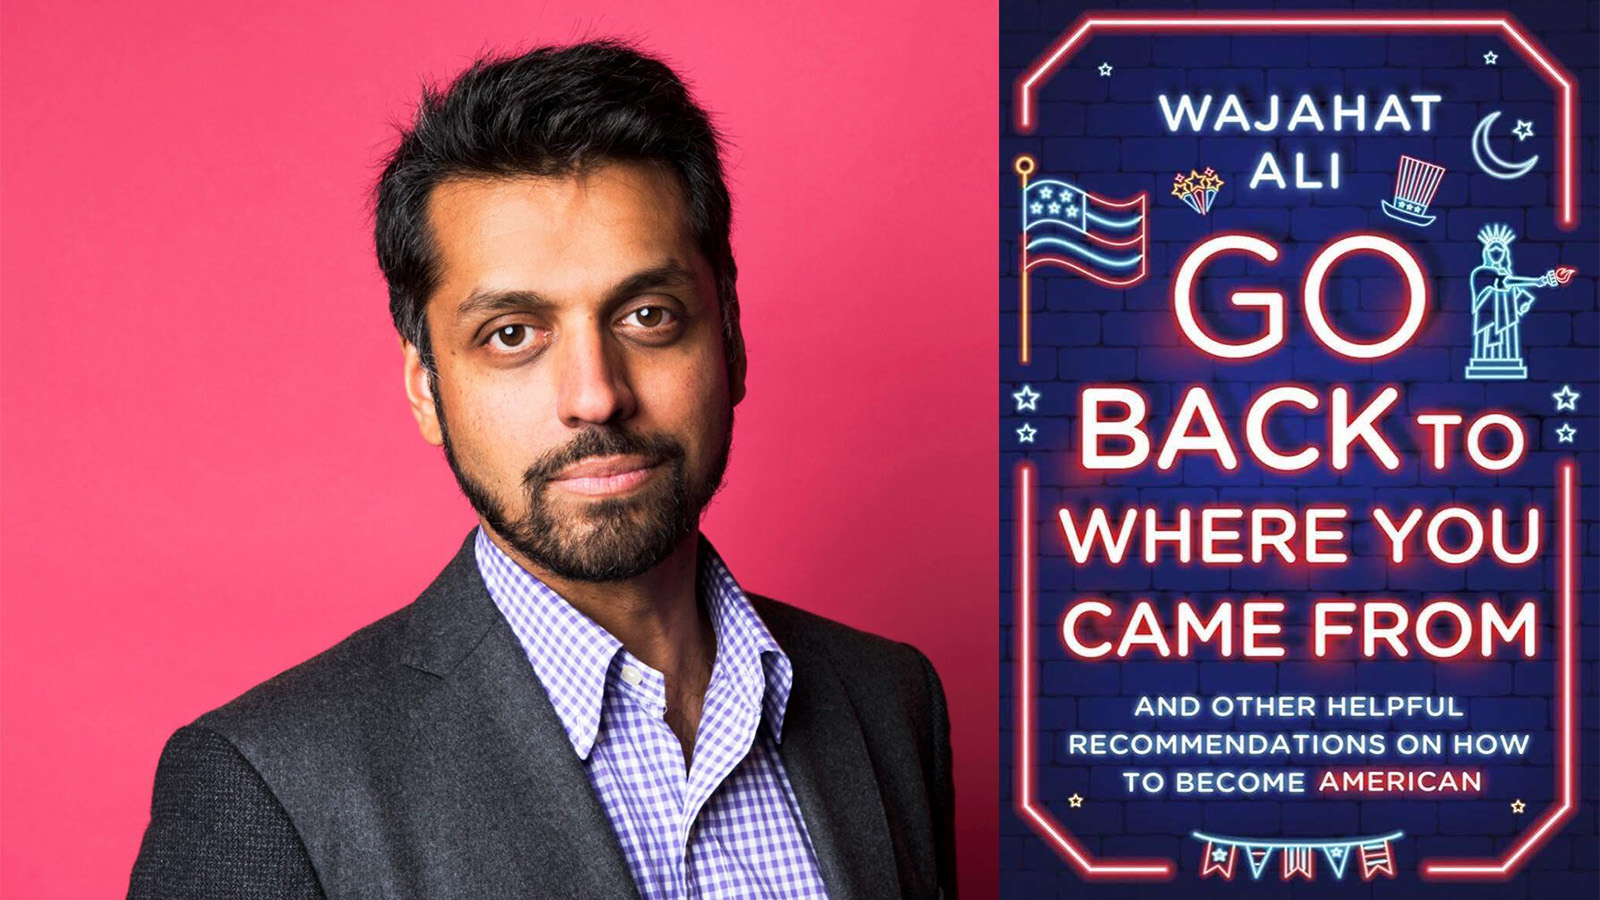 Author Wajahat Ali and the cover of his book, "Go Back To Where You Came From: And Other Helpful Recommendations on Becoming American" (Photo by Damon Dahlen, Huffington Post)